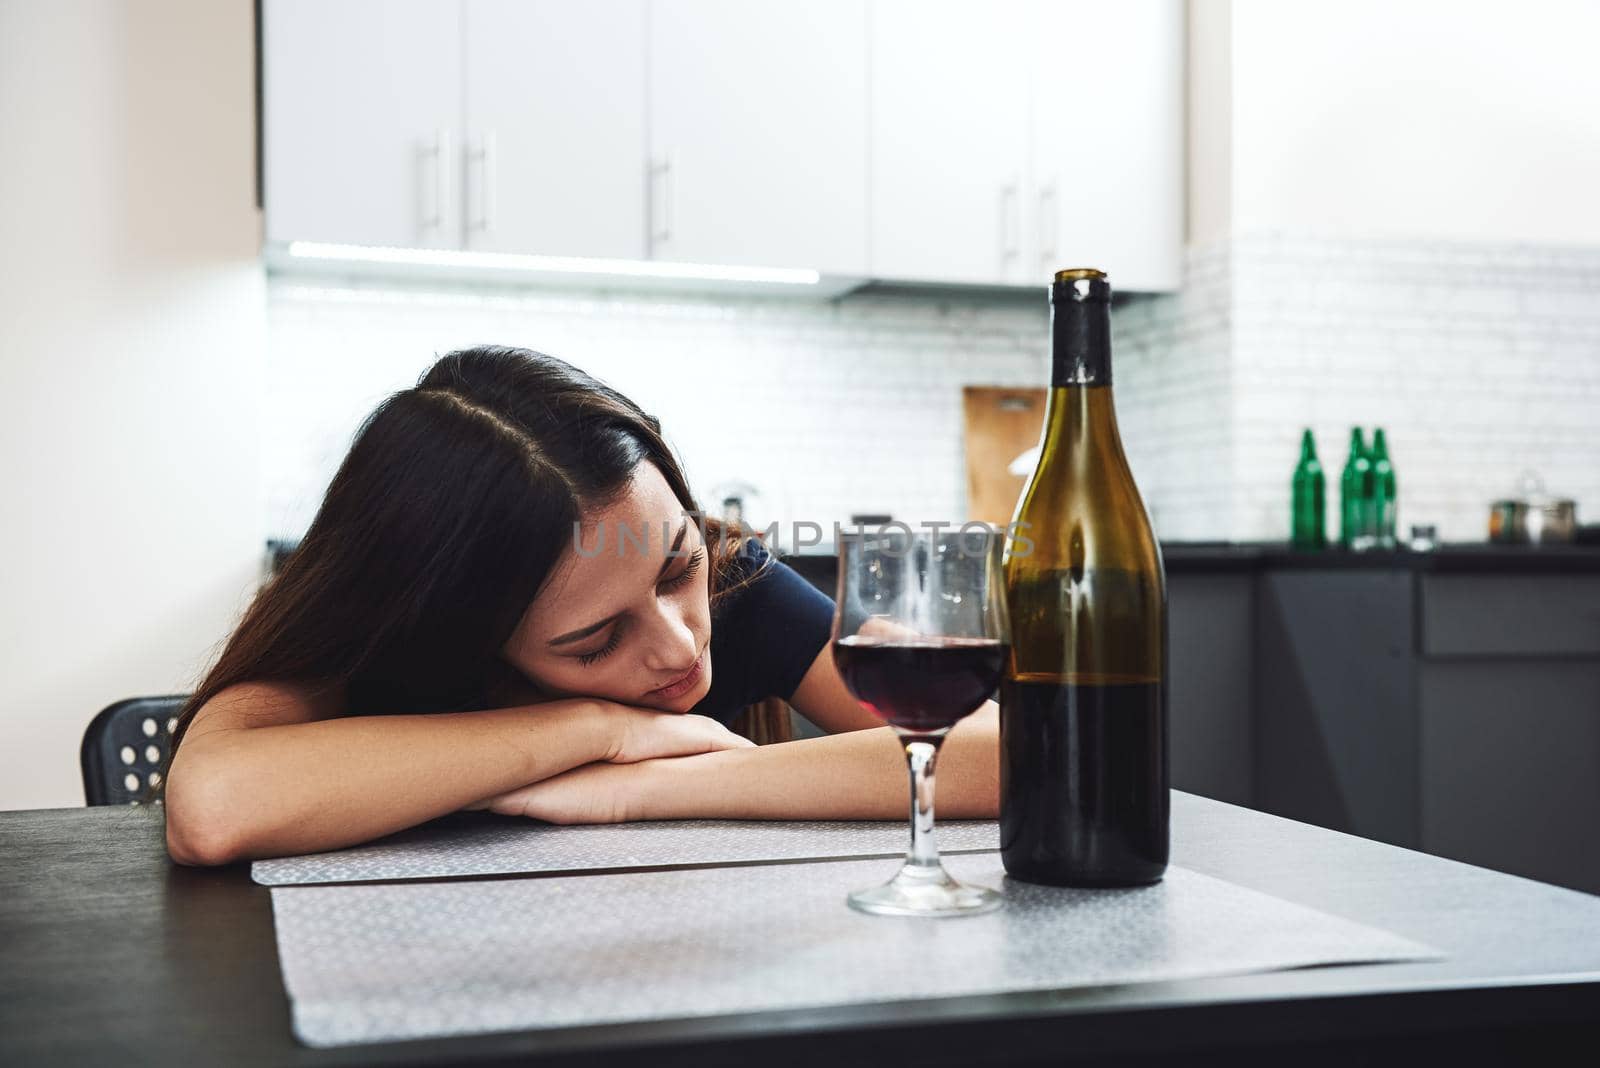 After drinking. Sleepy drunk young woman lying on the table in the kitchen and sleeping with bottle and glass of red wine standing on the table in front of her